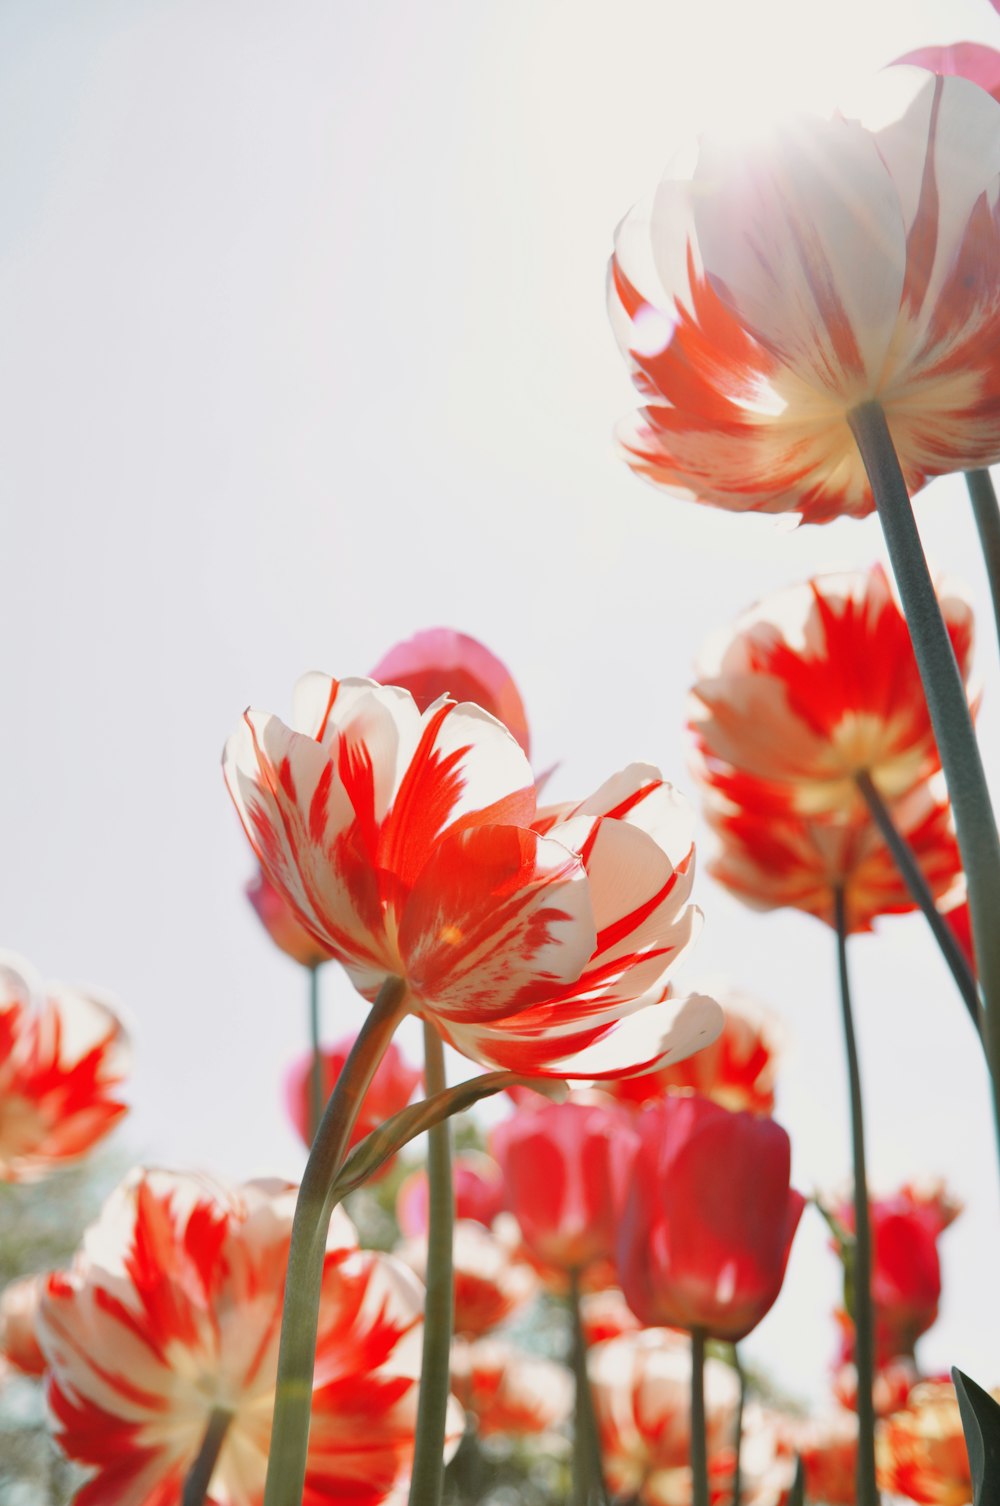 full-bloomed red and white tulip flowers